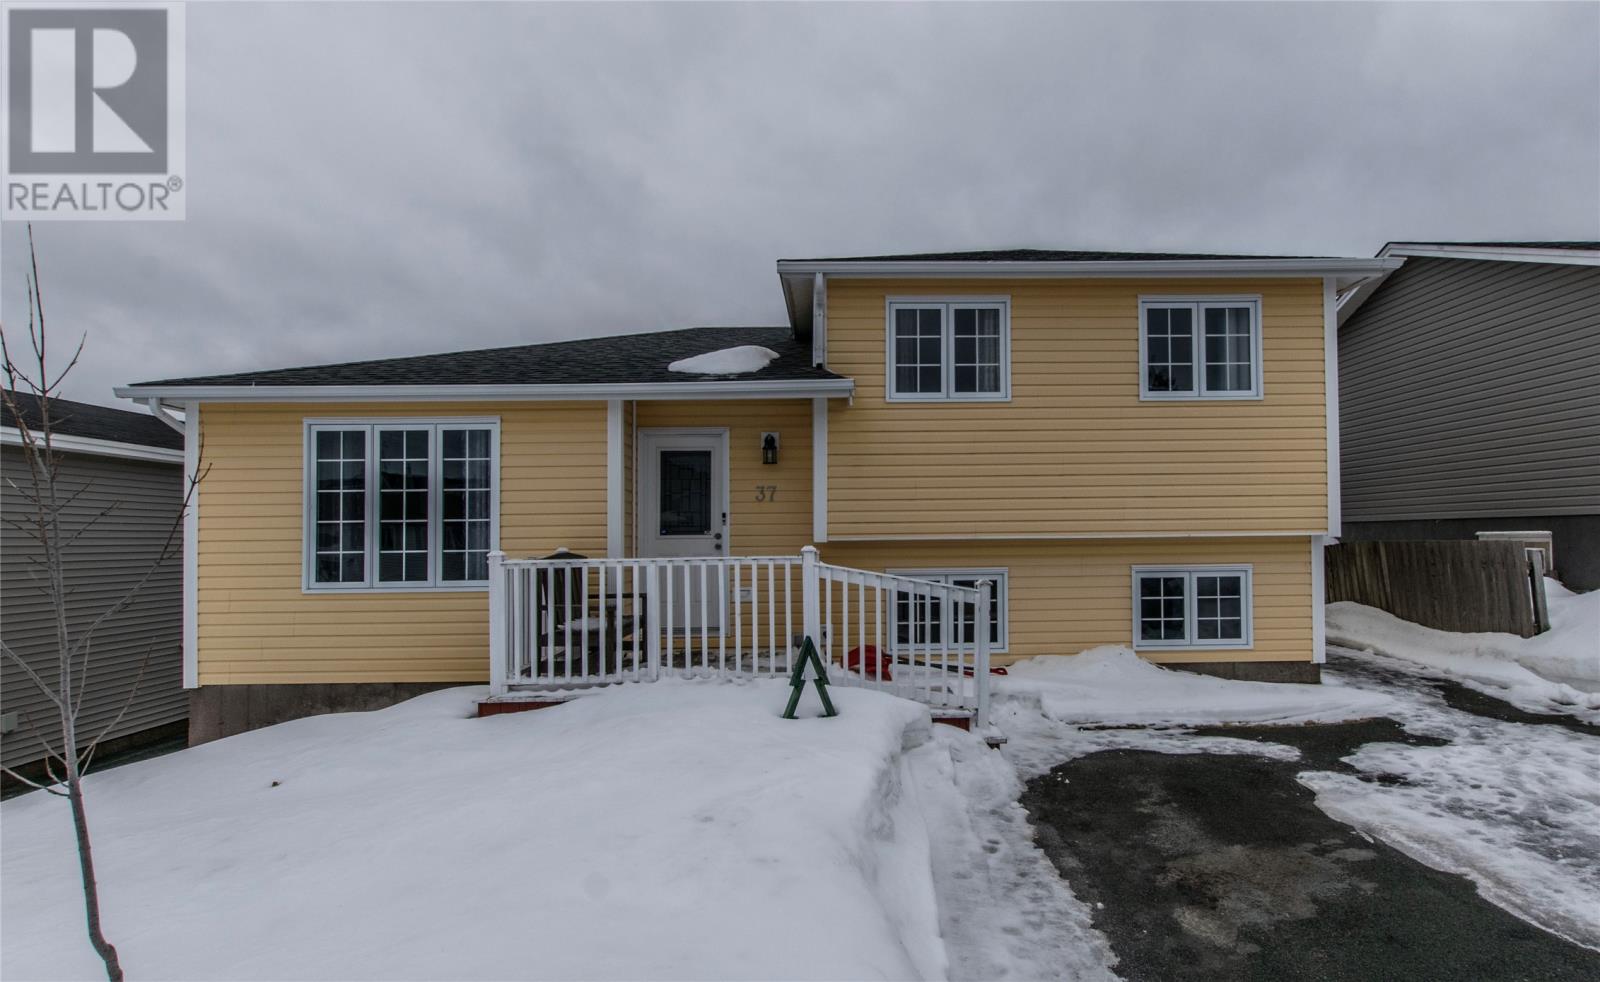 37 Frobisher Avenue, Mount Pearl, A1N4W1, 5 Bedrooms Bedrooms, ,2 BathroomsBathrooms,Single Family,For sale,Frobisher,1268008